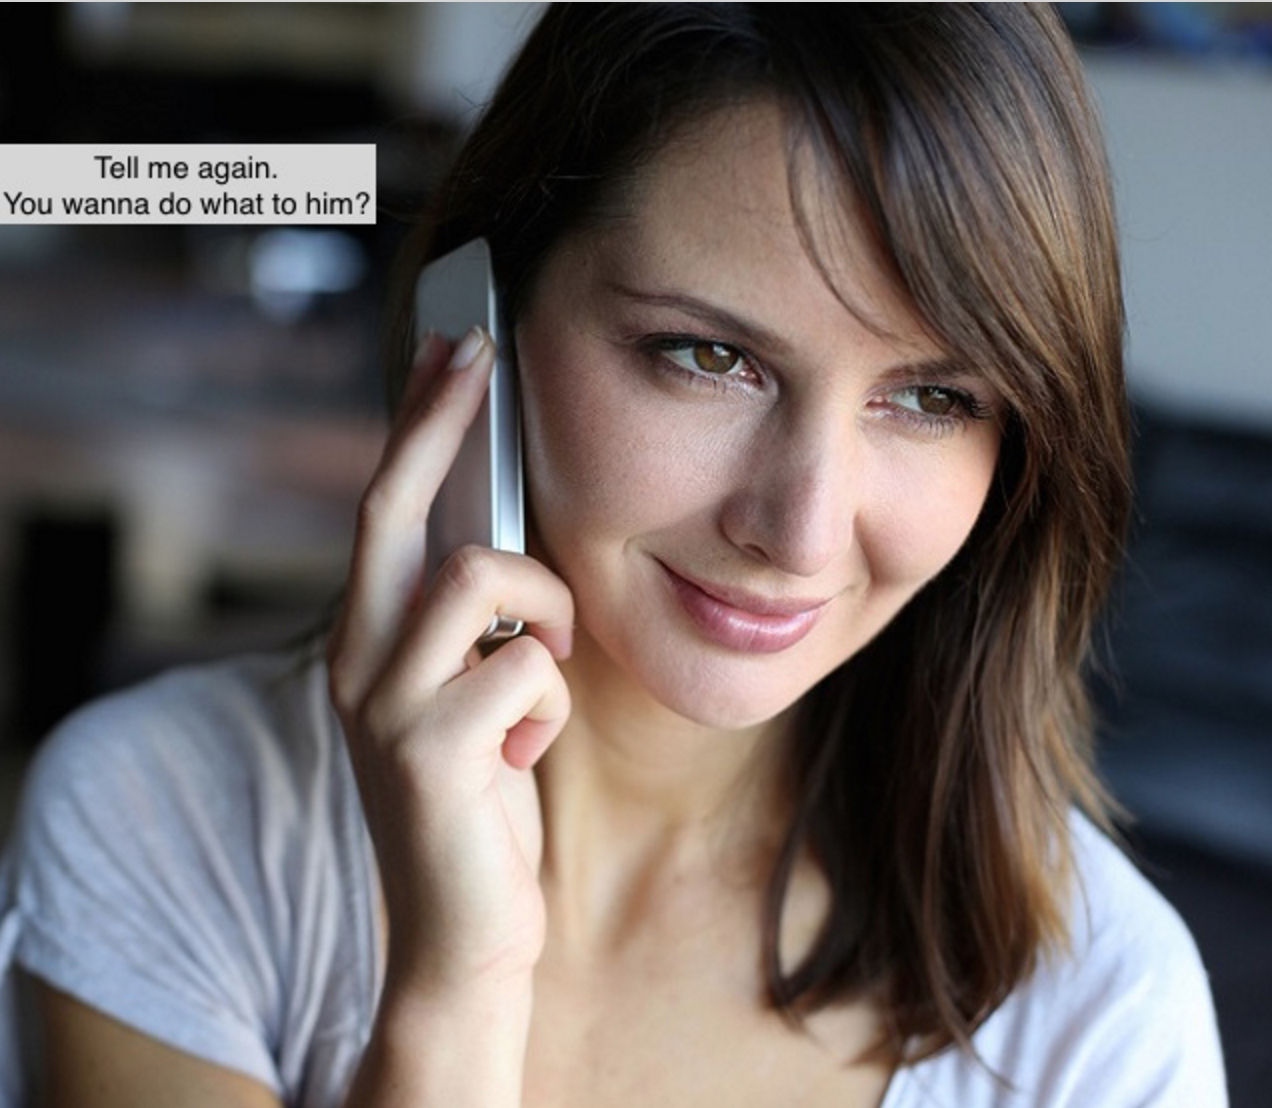 cheatingwife85:  On the phone with my lover with hubby close enough to hear everything